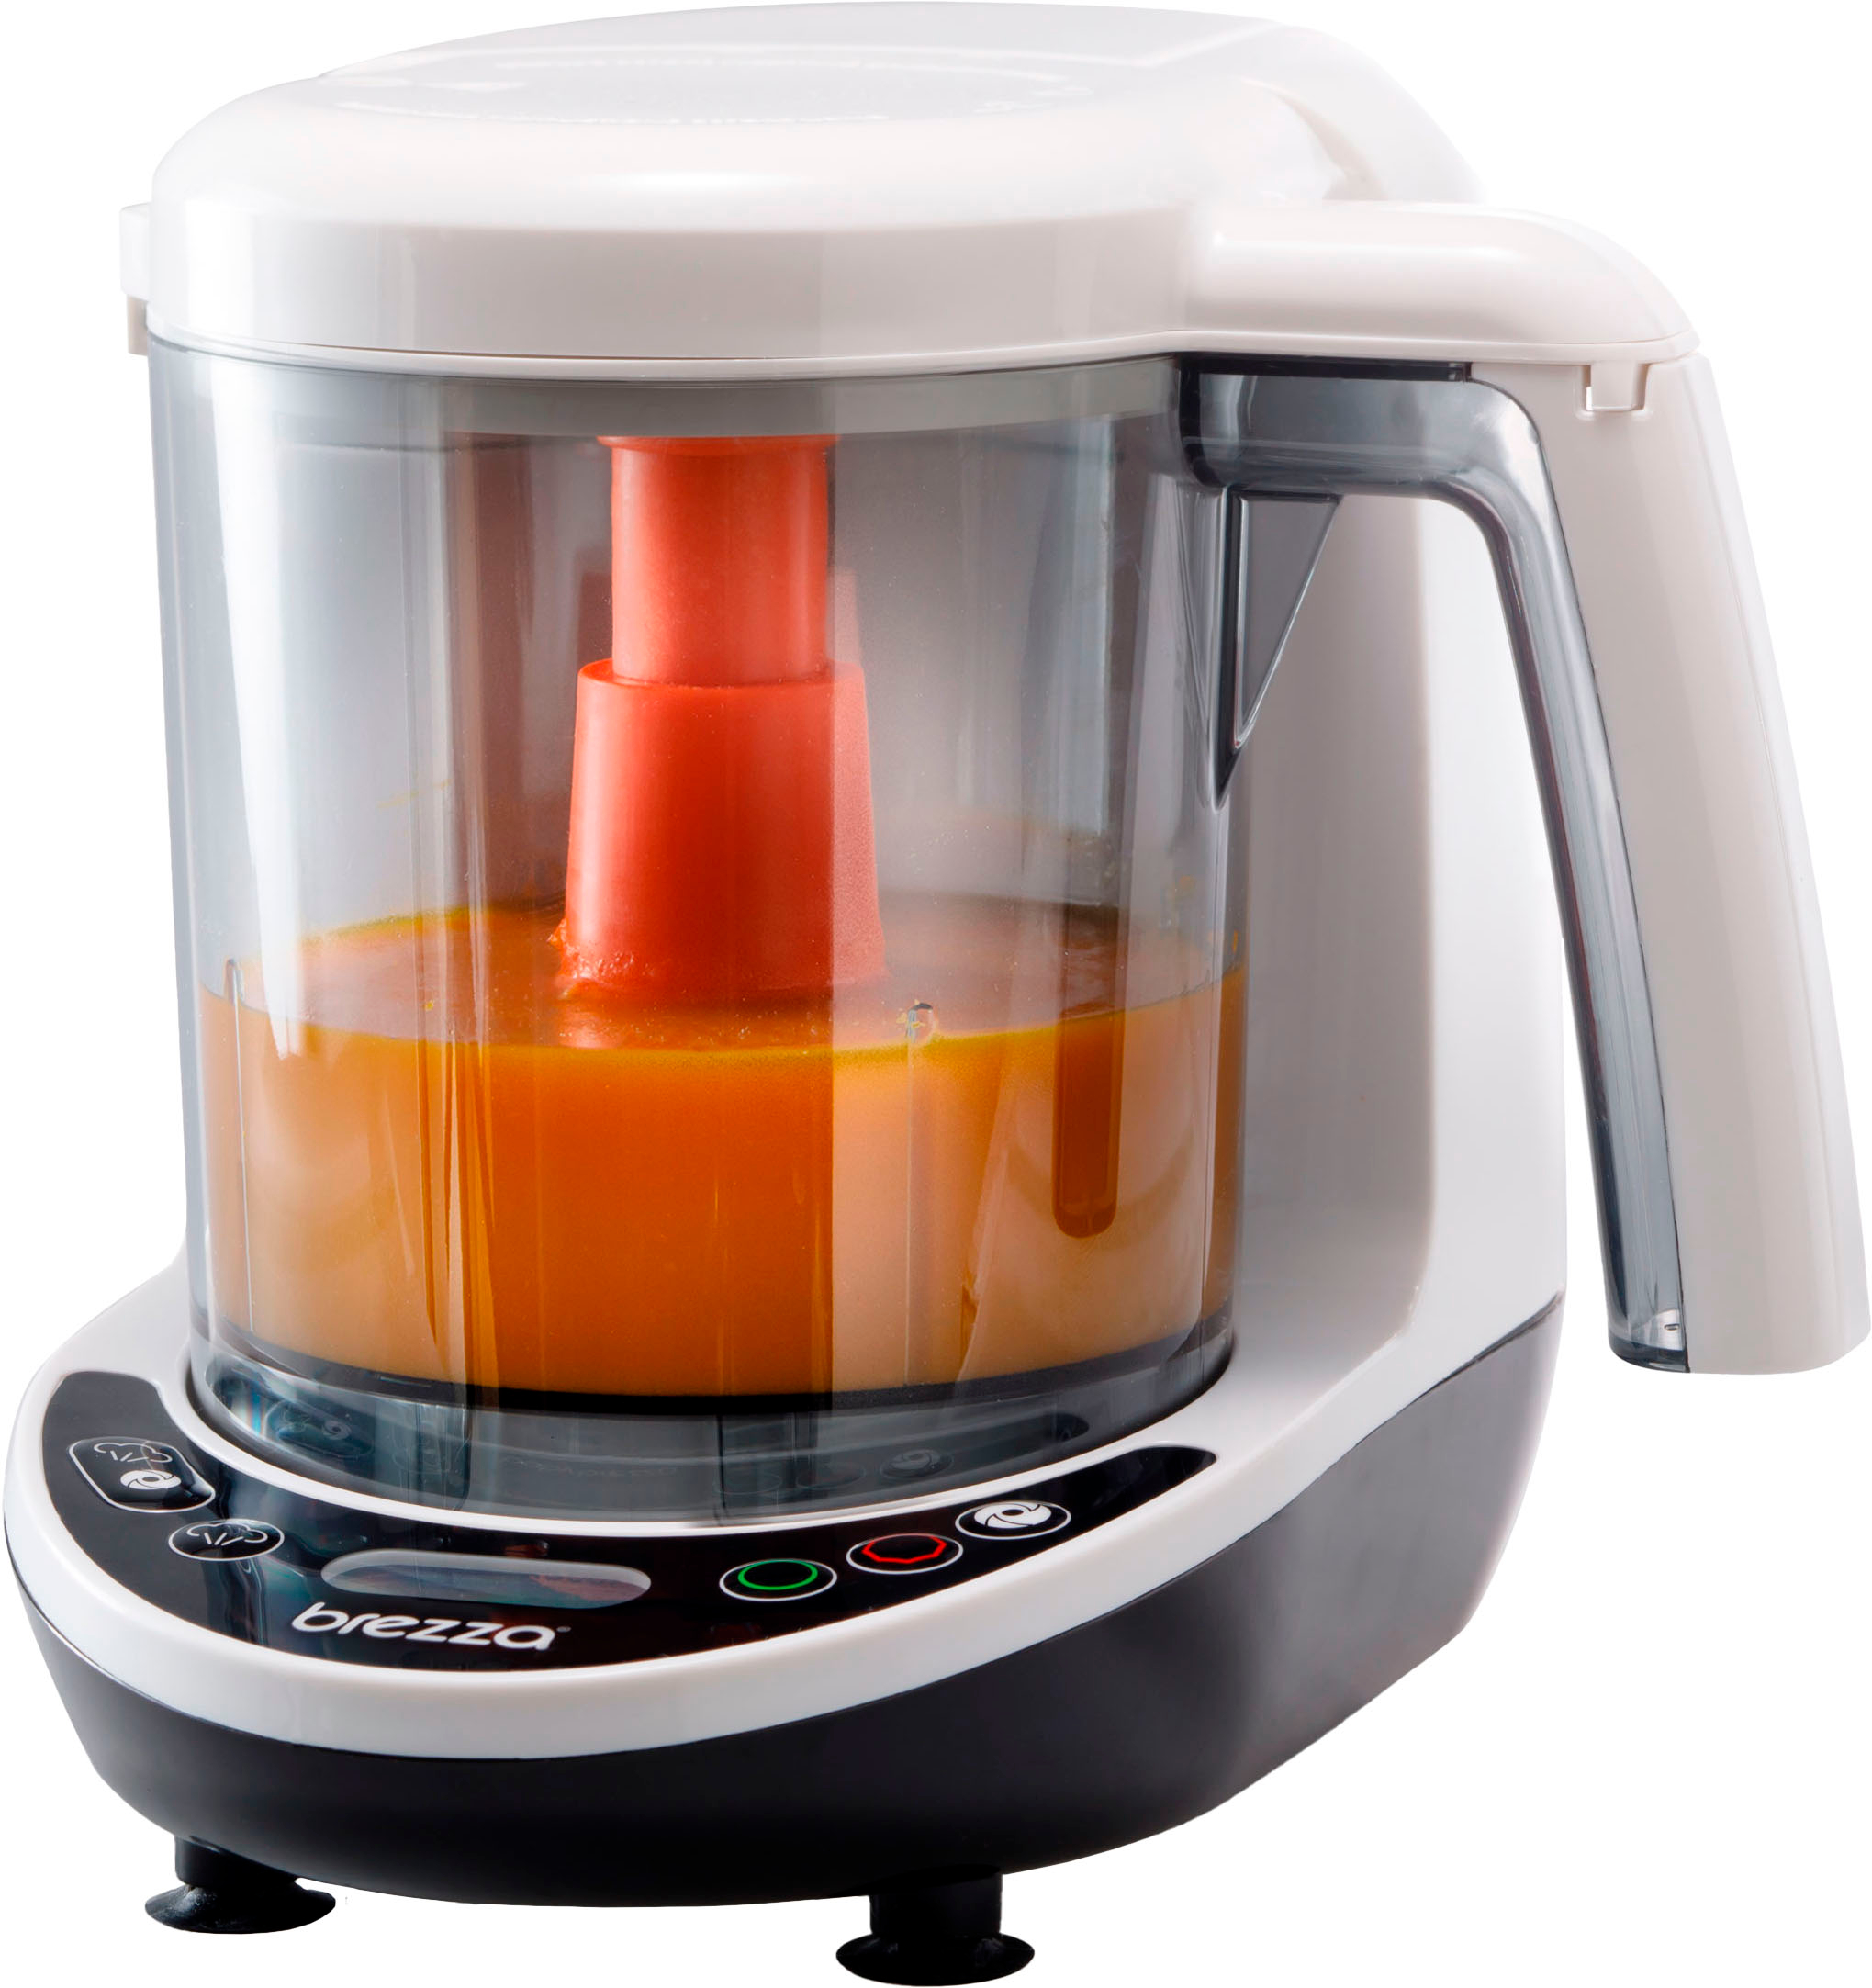 Angle View: Baby Brezza Deluxe 2-in-1 Baby Food Maker